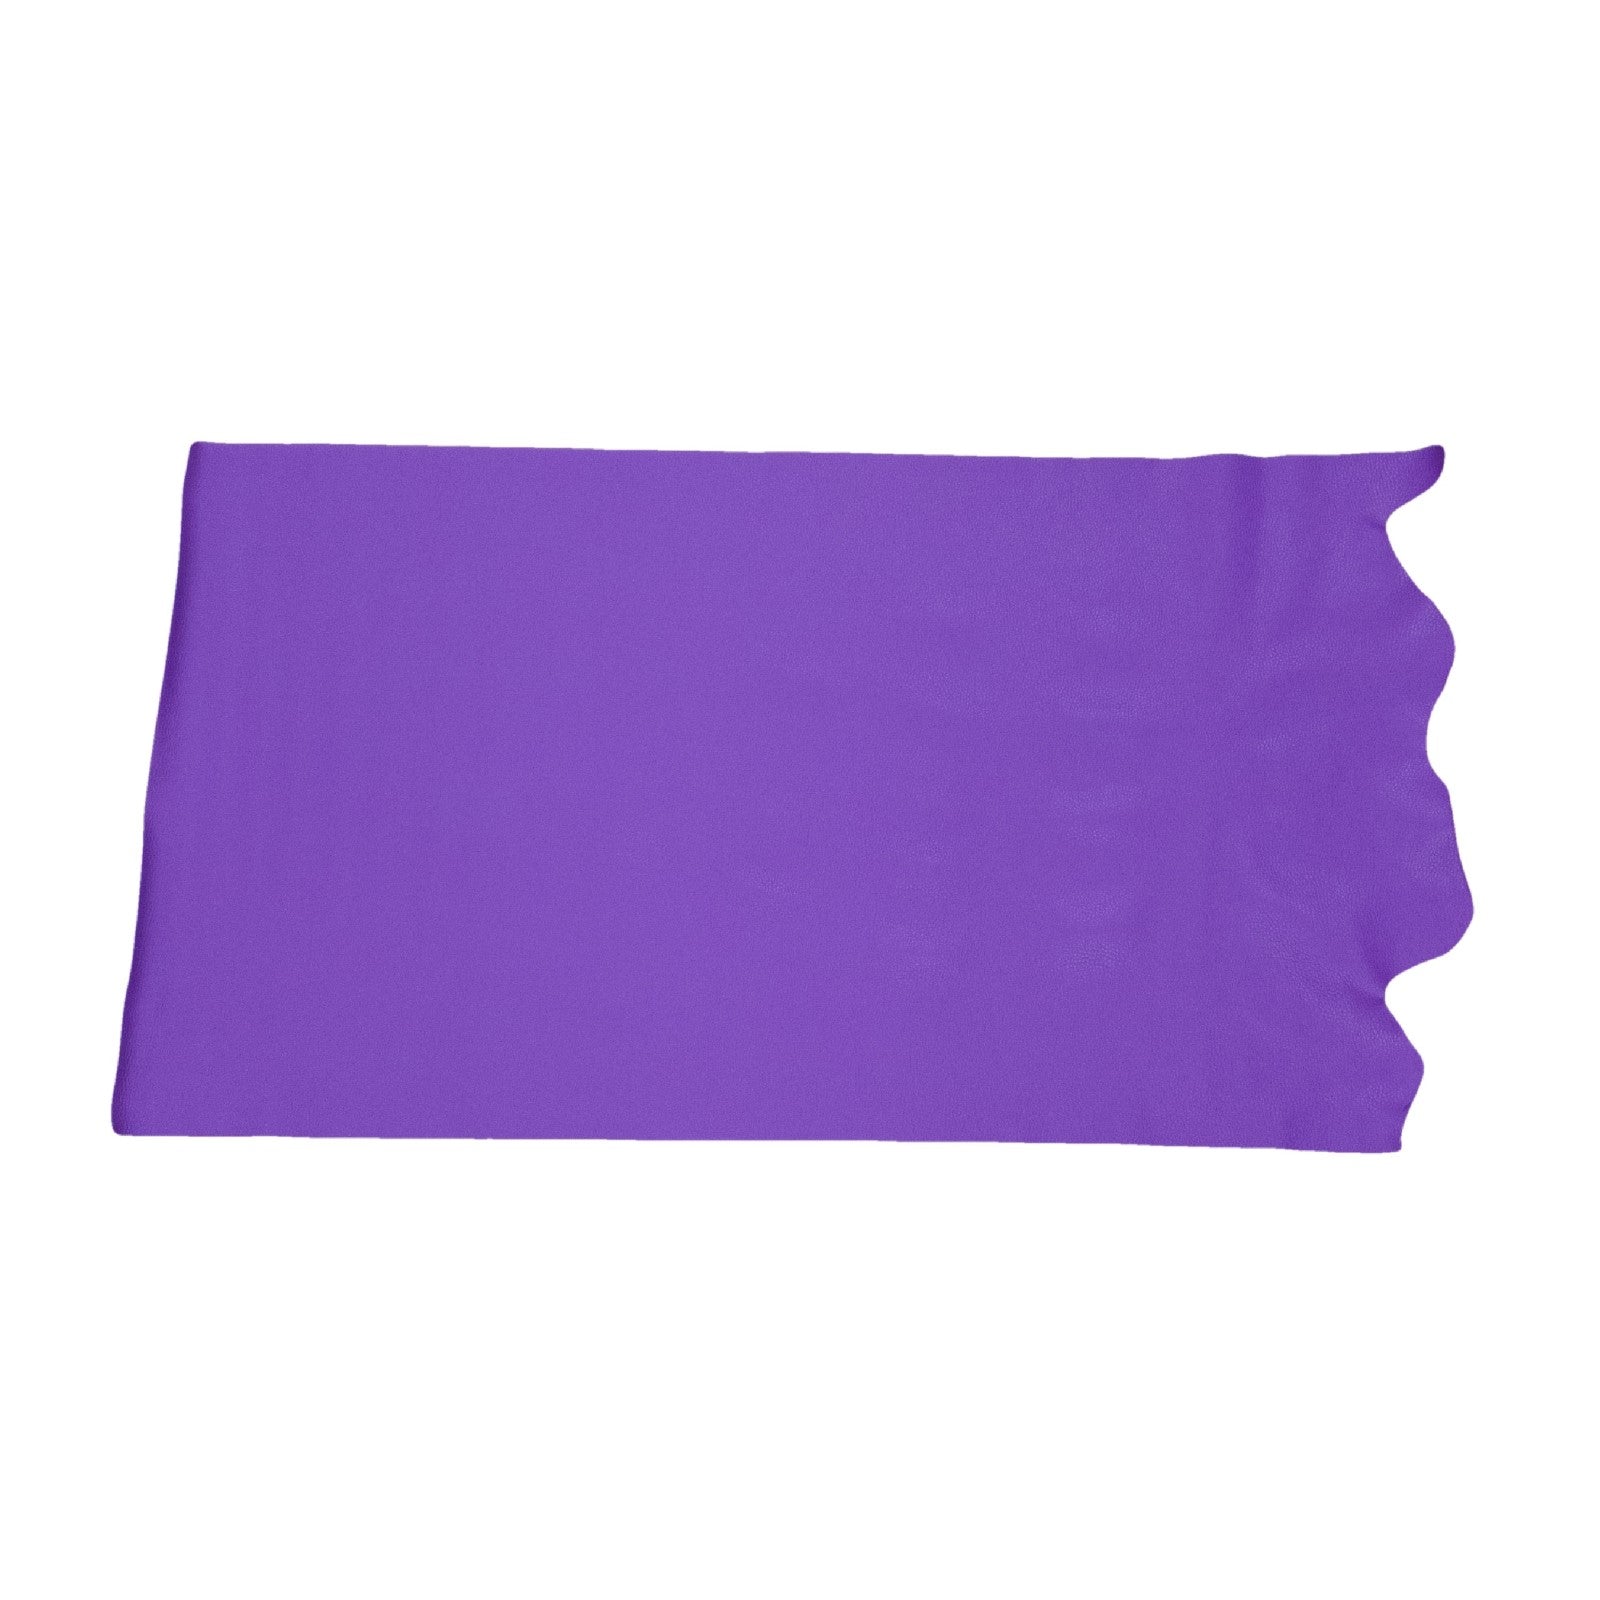 Viking Skol Purple Tried n True 3-4 oz Leather Cow Hides, Middle Piece / 6.5-7.5 Sq Ft | The Leather Guy